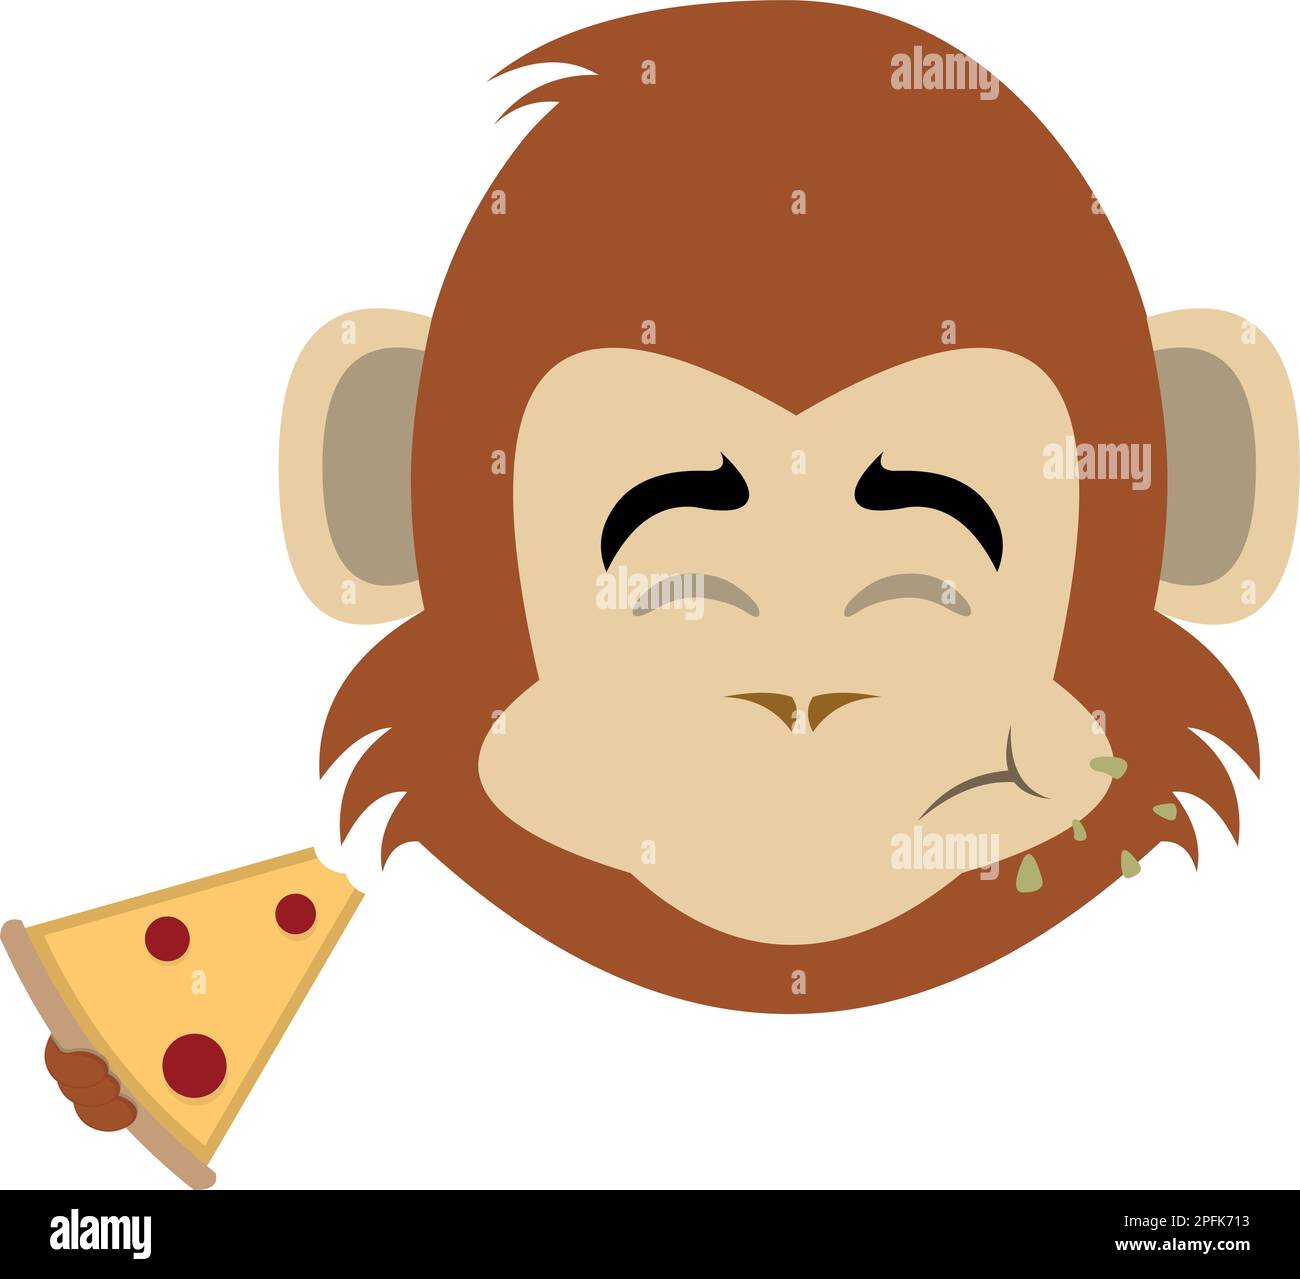 vector illustration cartoon character face of a monkey eating a slice of pizza Stock Vector